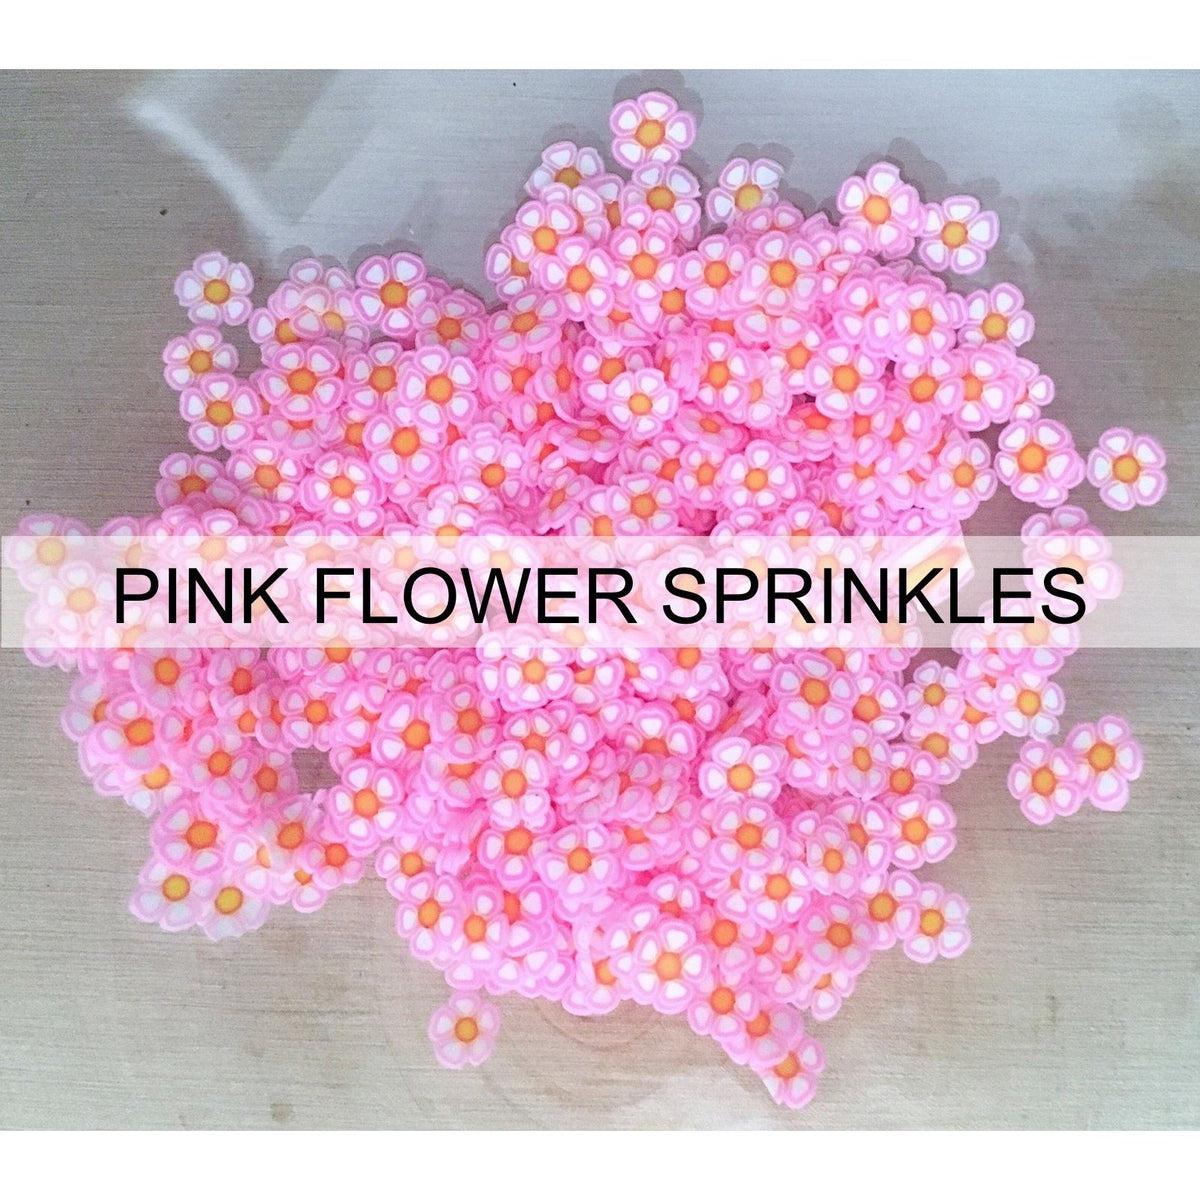 Pink Flower Sprinkles by Kat Scrappiness - Kat Scrappiness